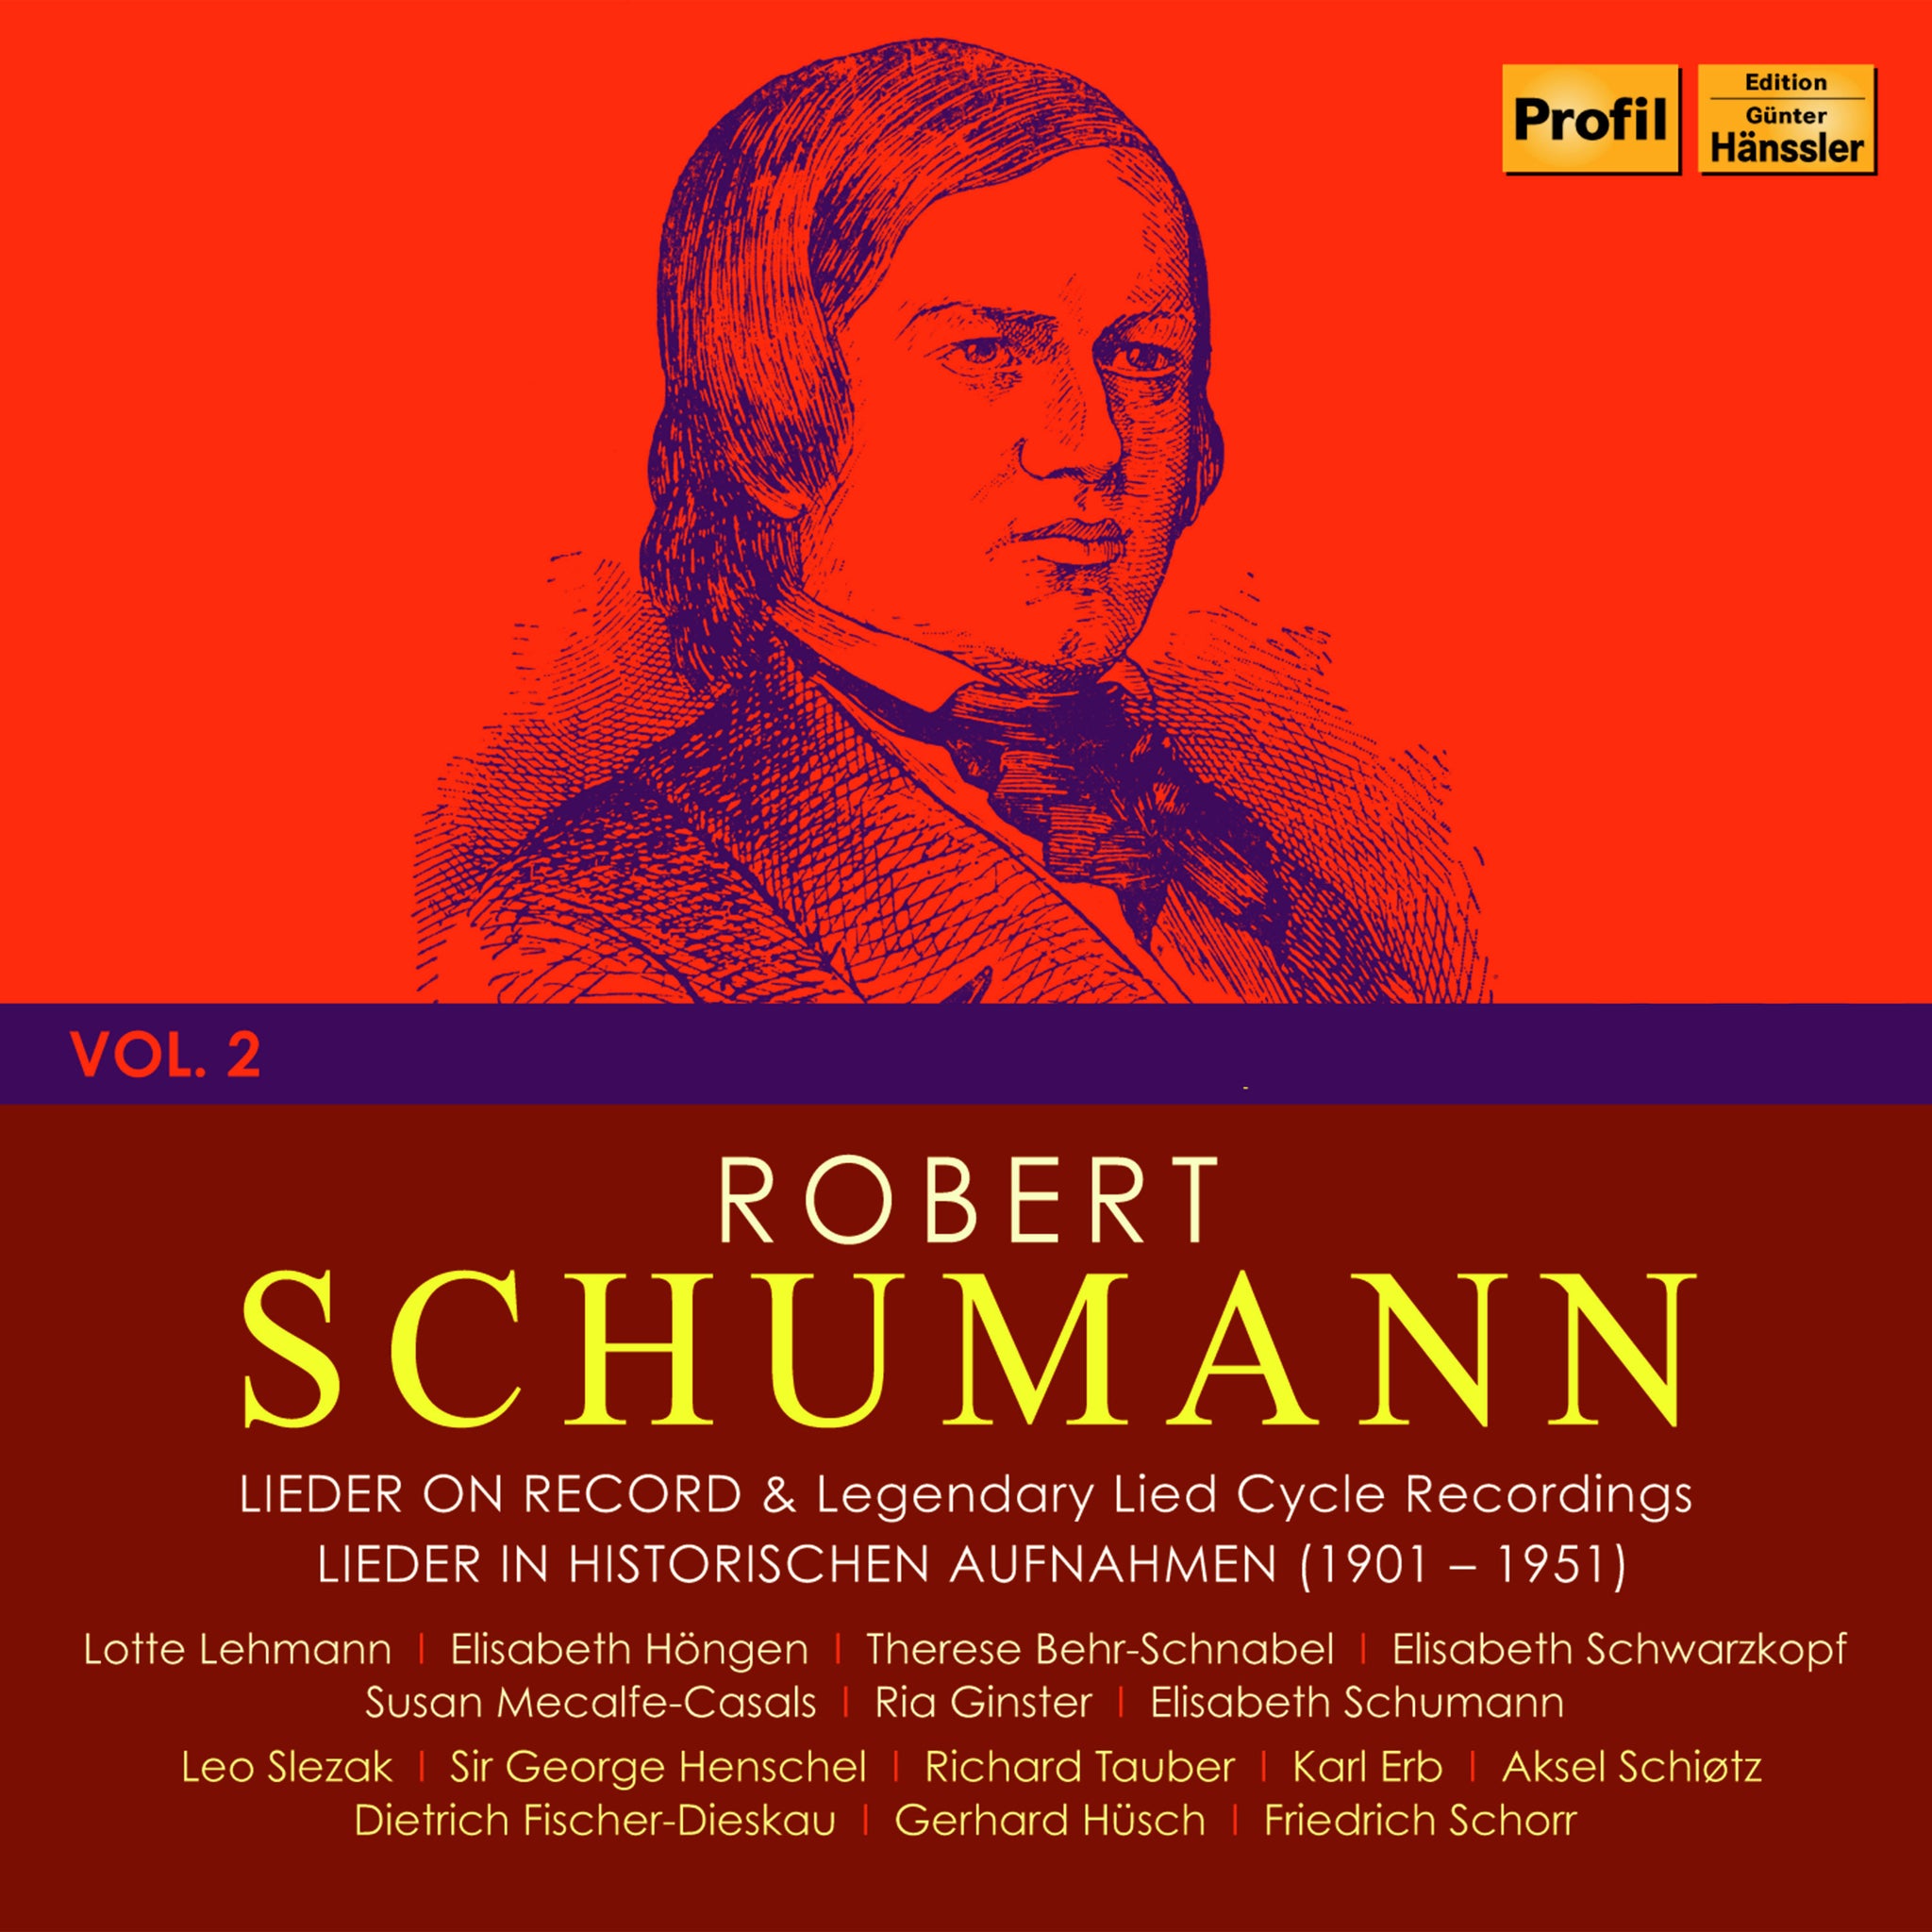 Schumann: Lieder on Record & Legendary Cycle Recordings